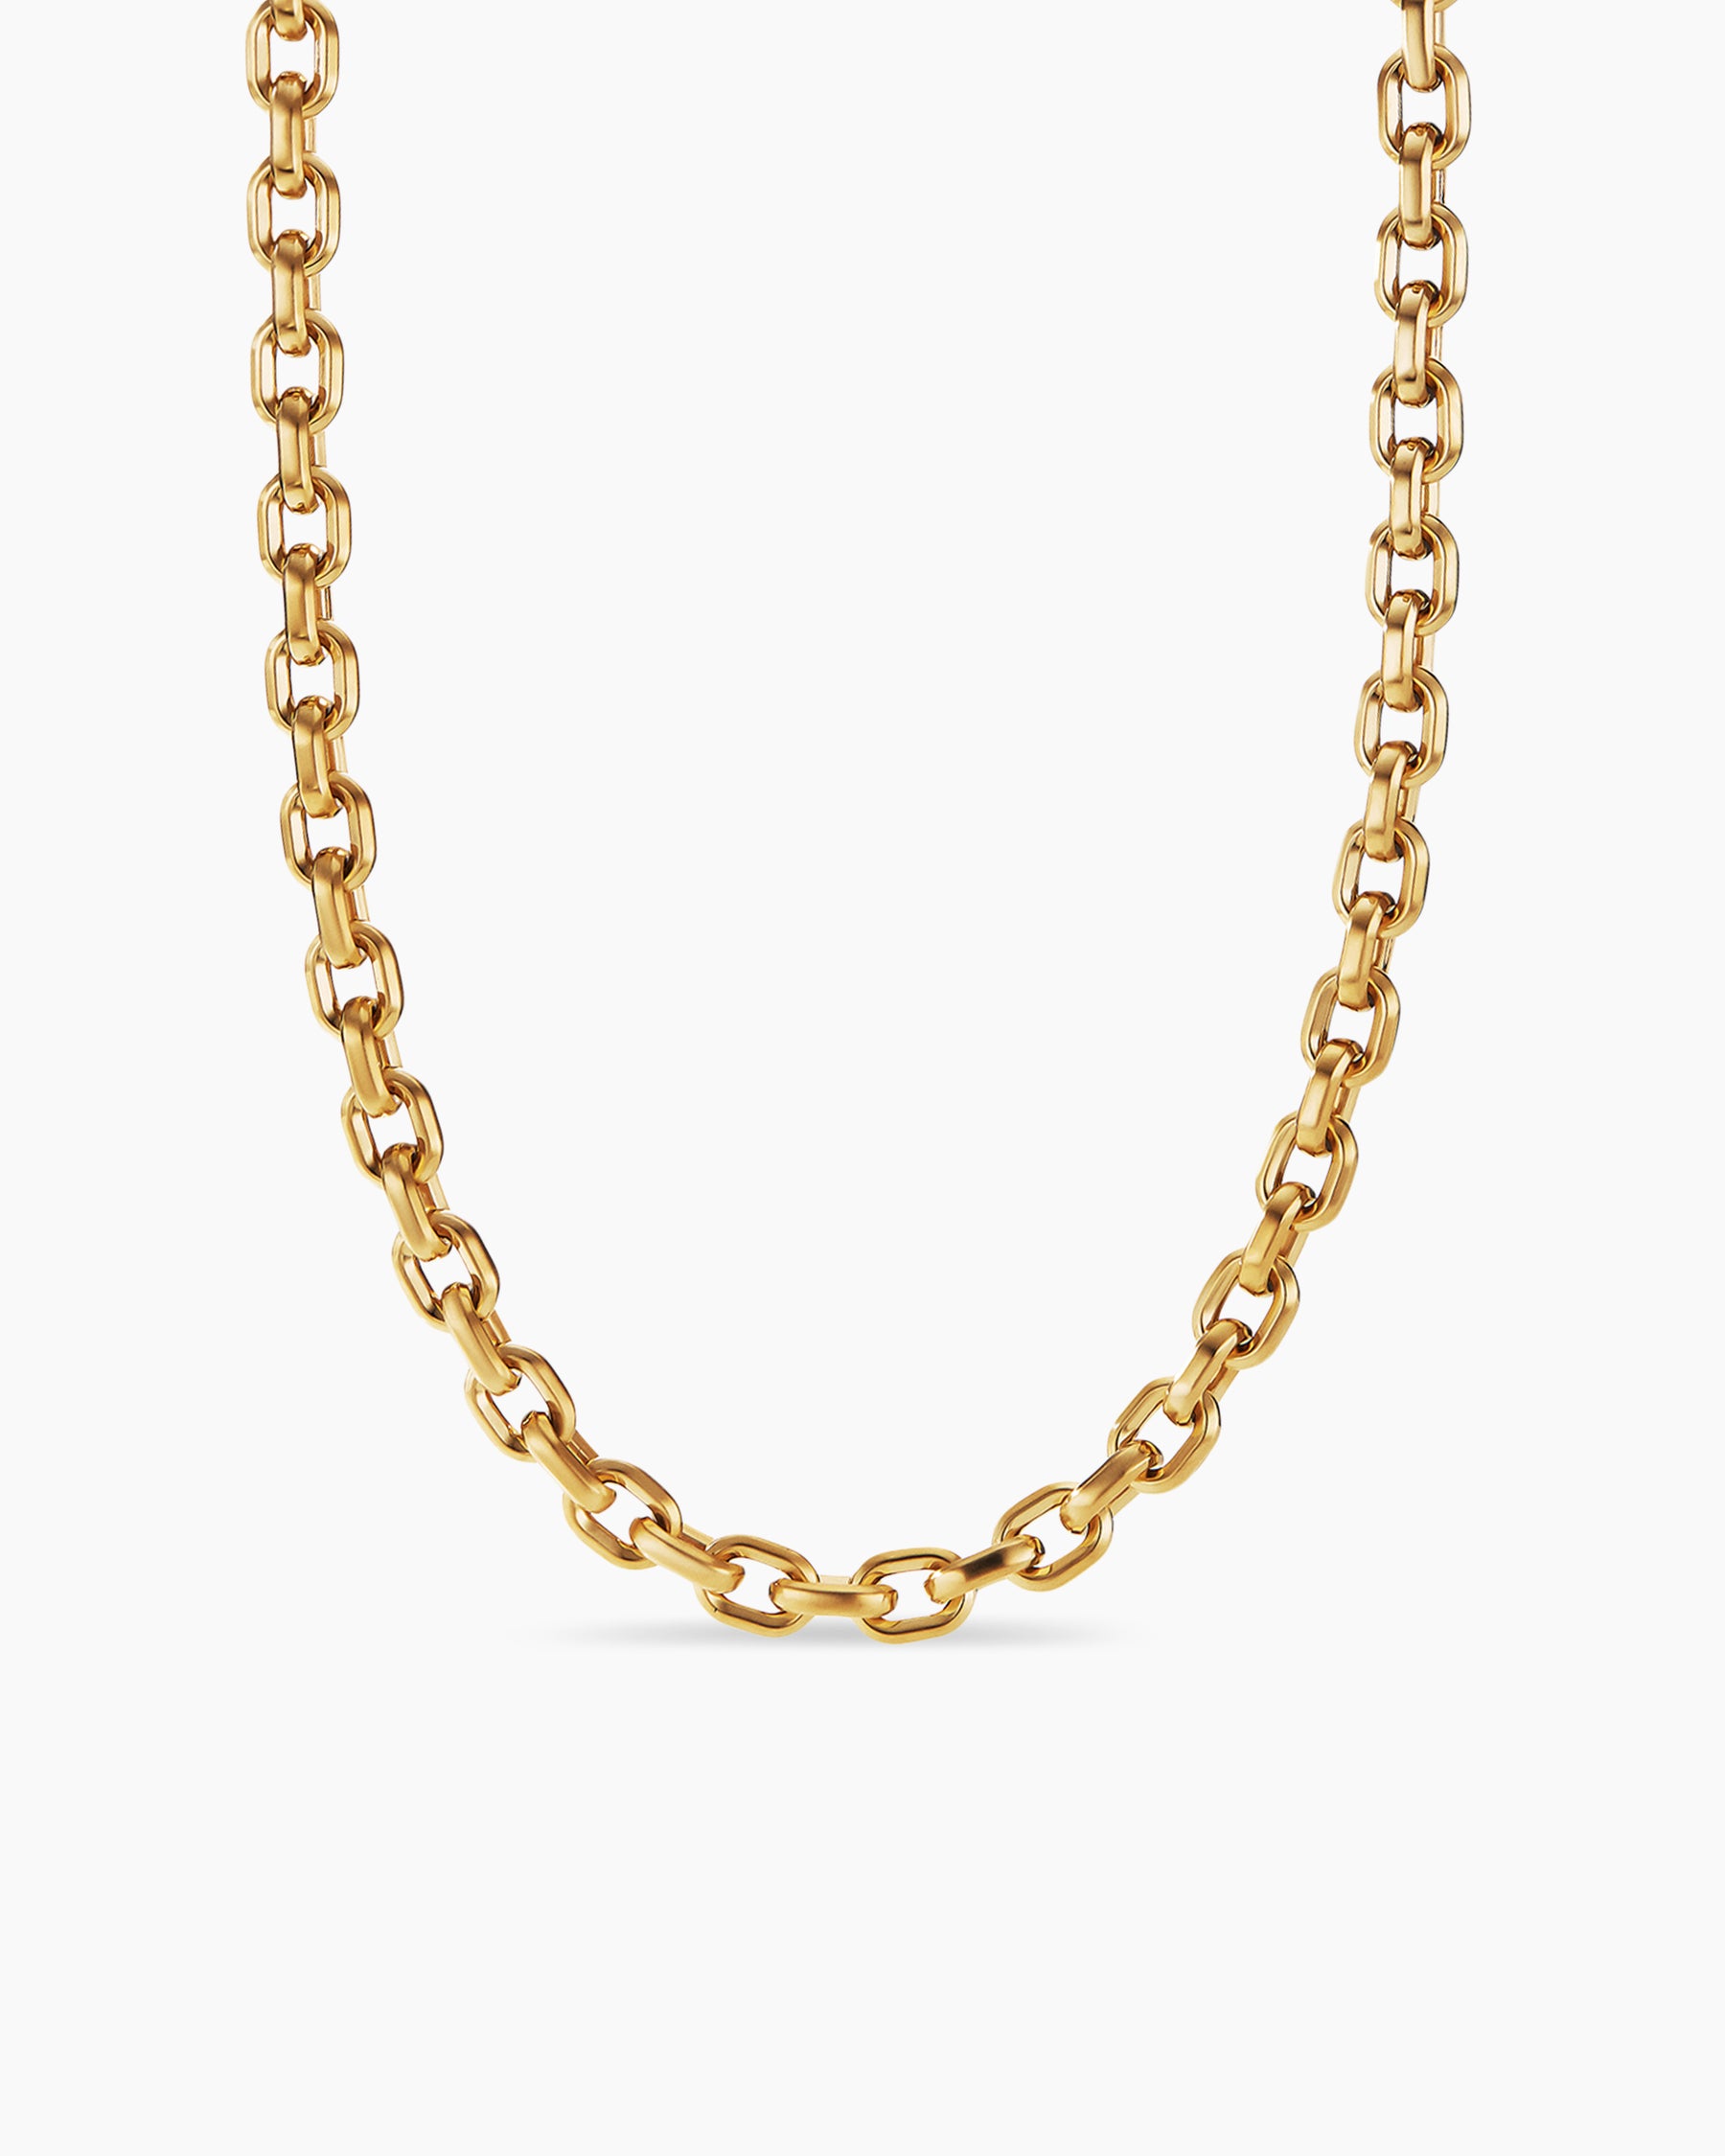 Mens Deco Chain Link Necklace in 18K Yellow Gold, 6.5mm | David Yurman